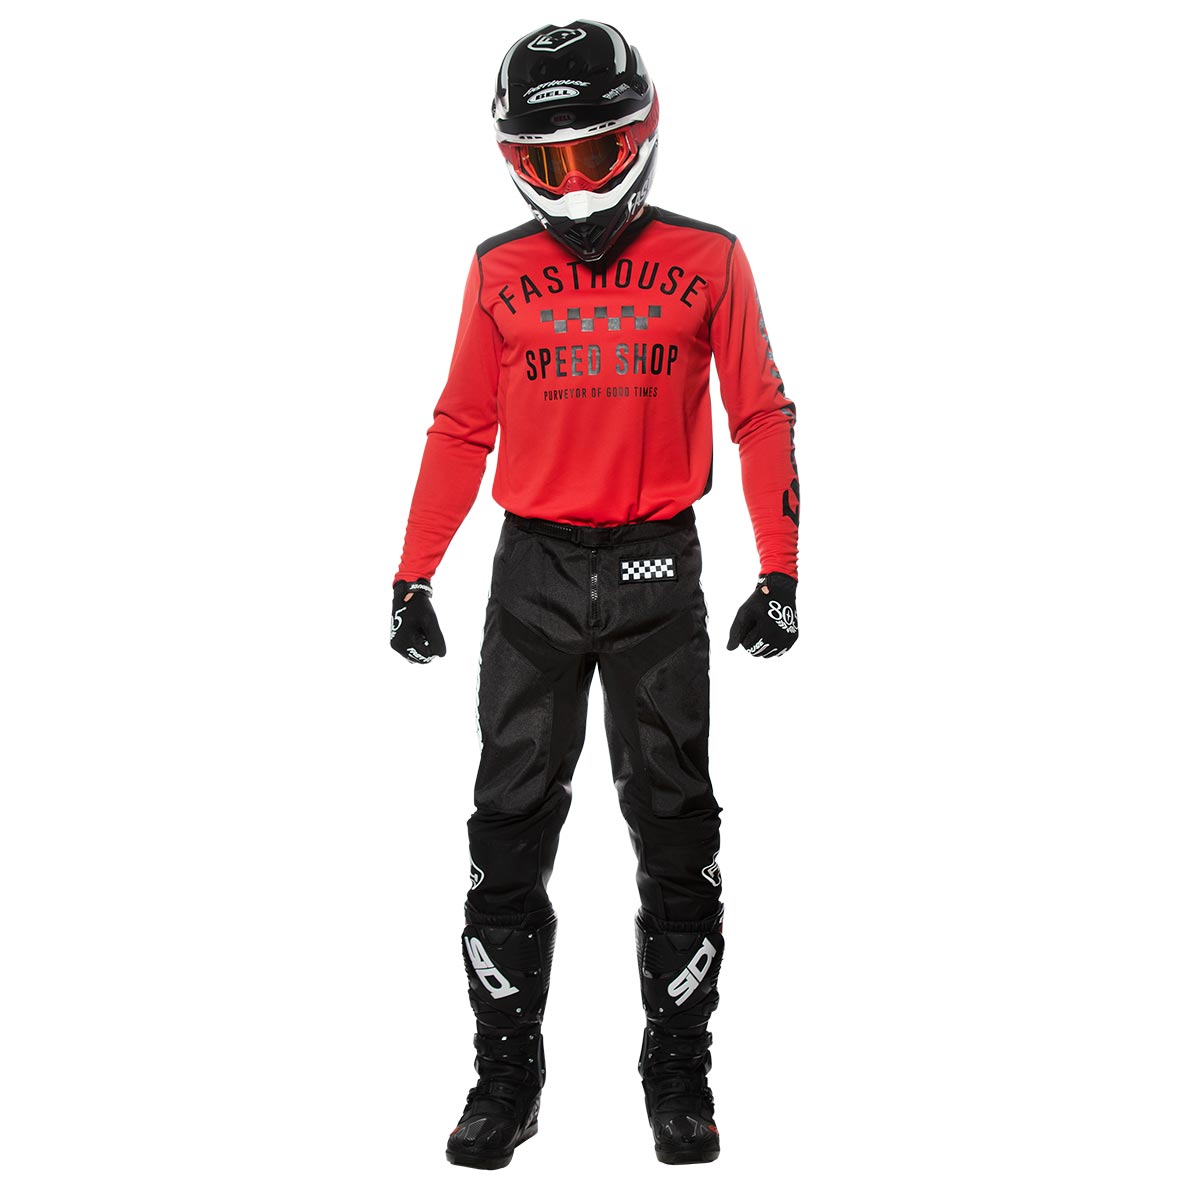 Fasthouse Carbon Jersey - Red, Carbon Black Pants